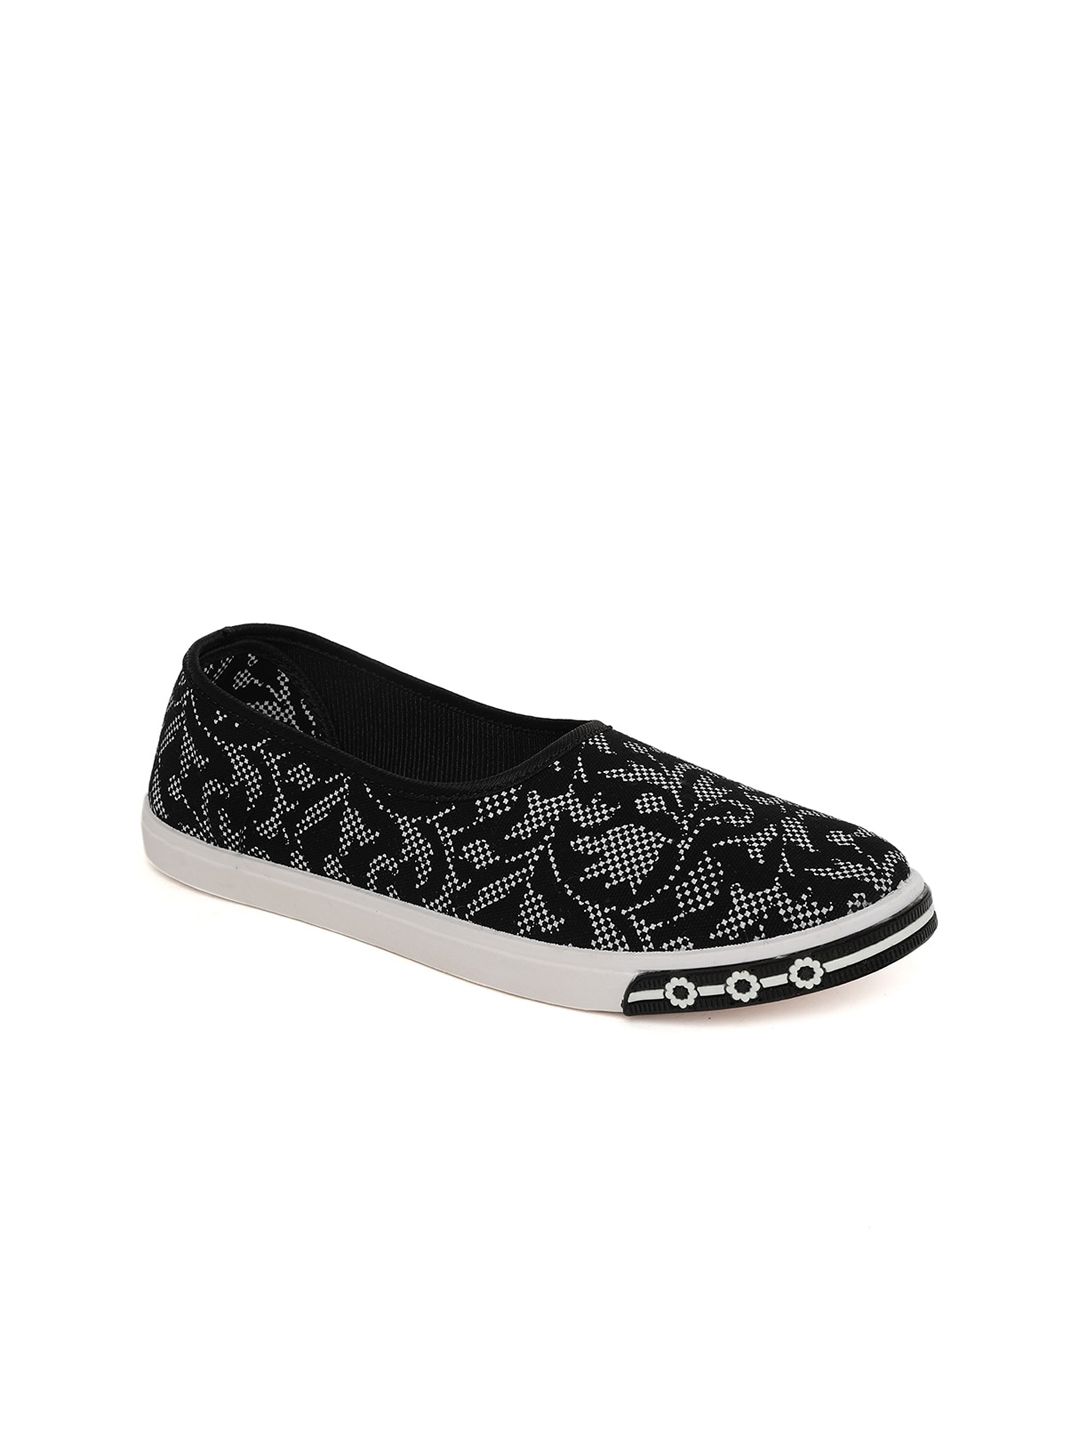 Paragon Women Printed Slip-On Sneakers Price in India